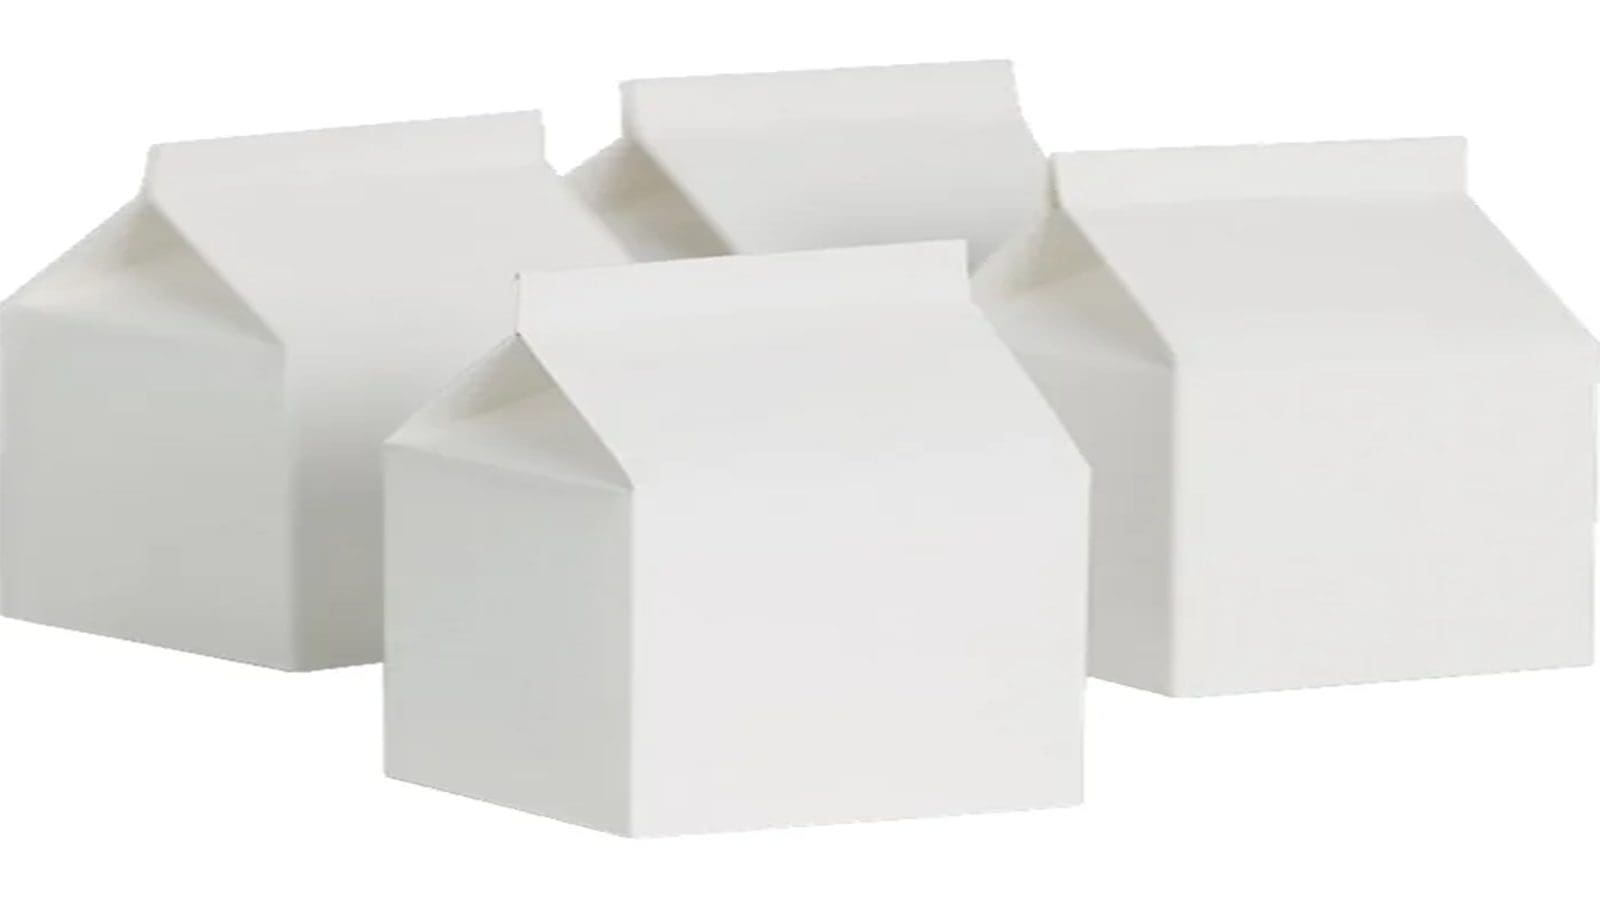 Research deems paperboard packaging ineffective in preserving milk freshness